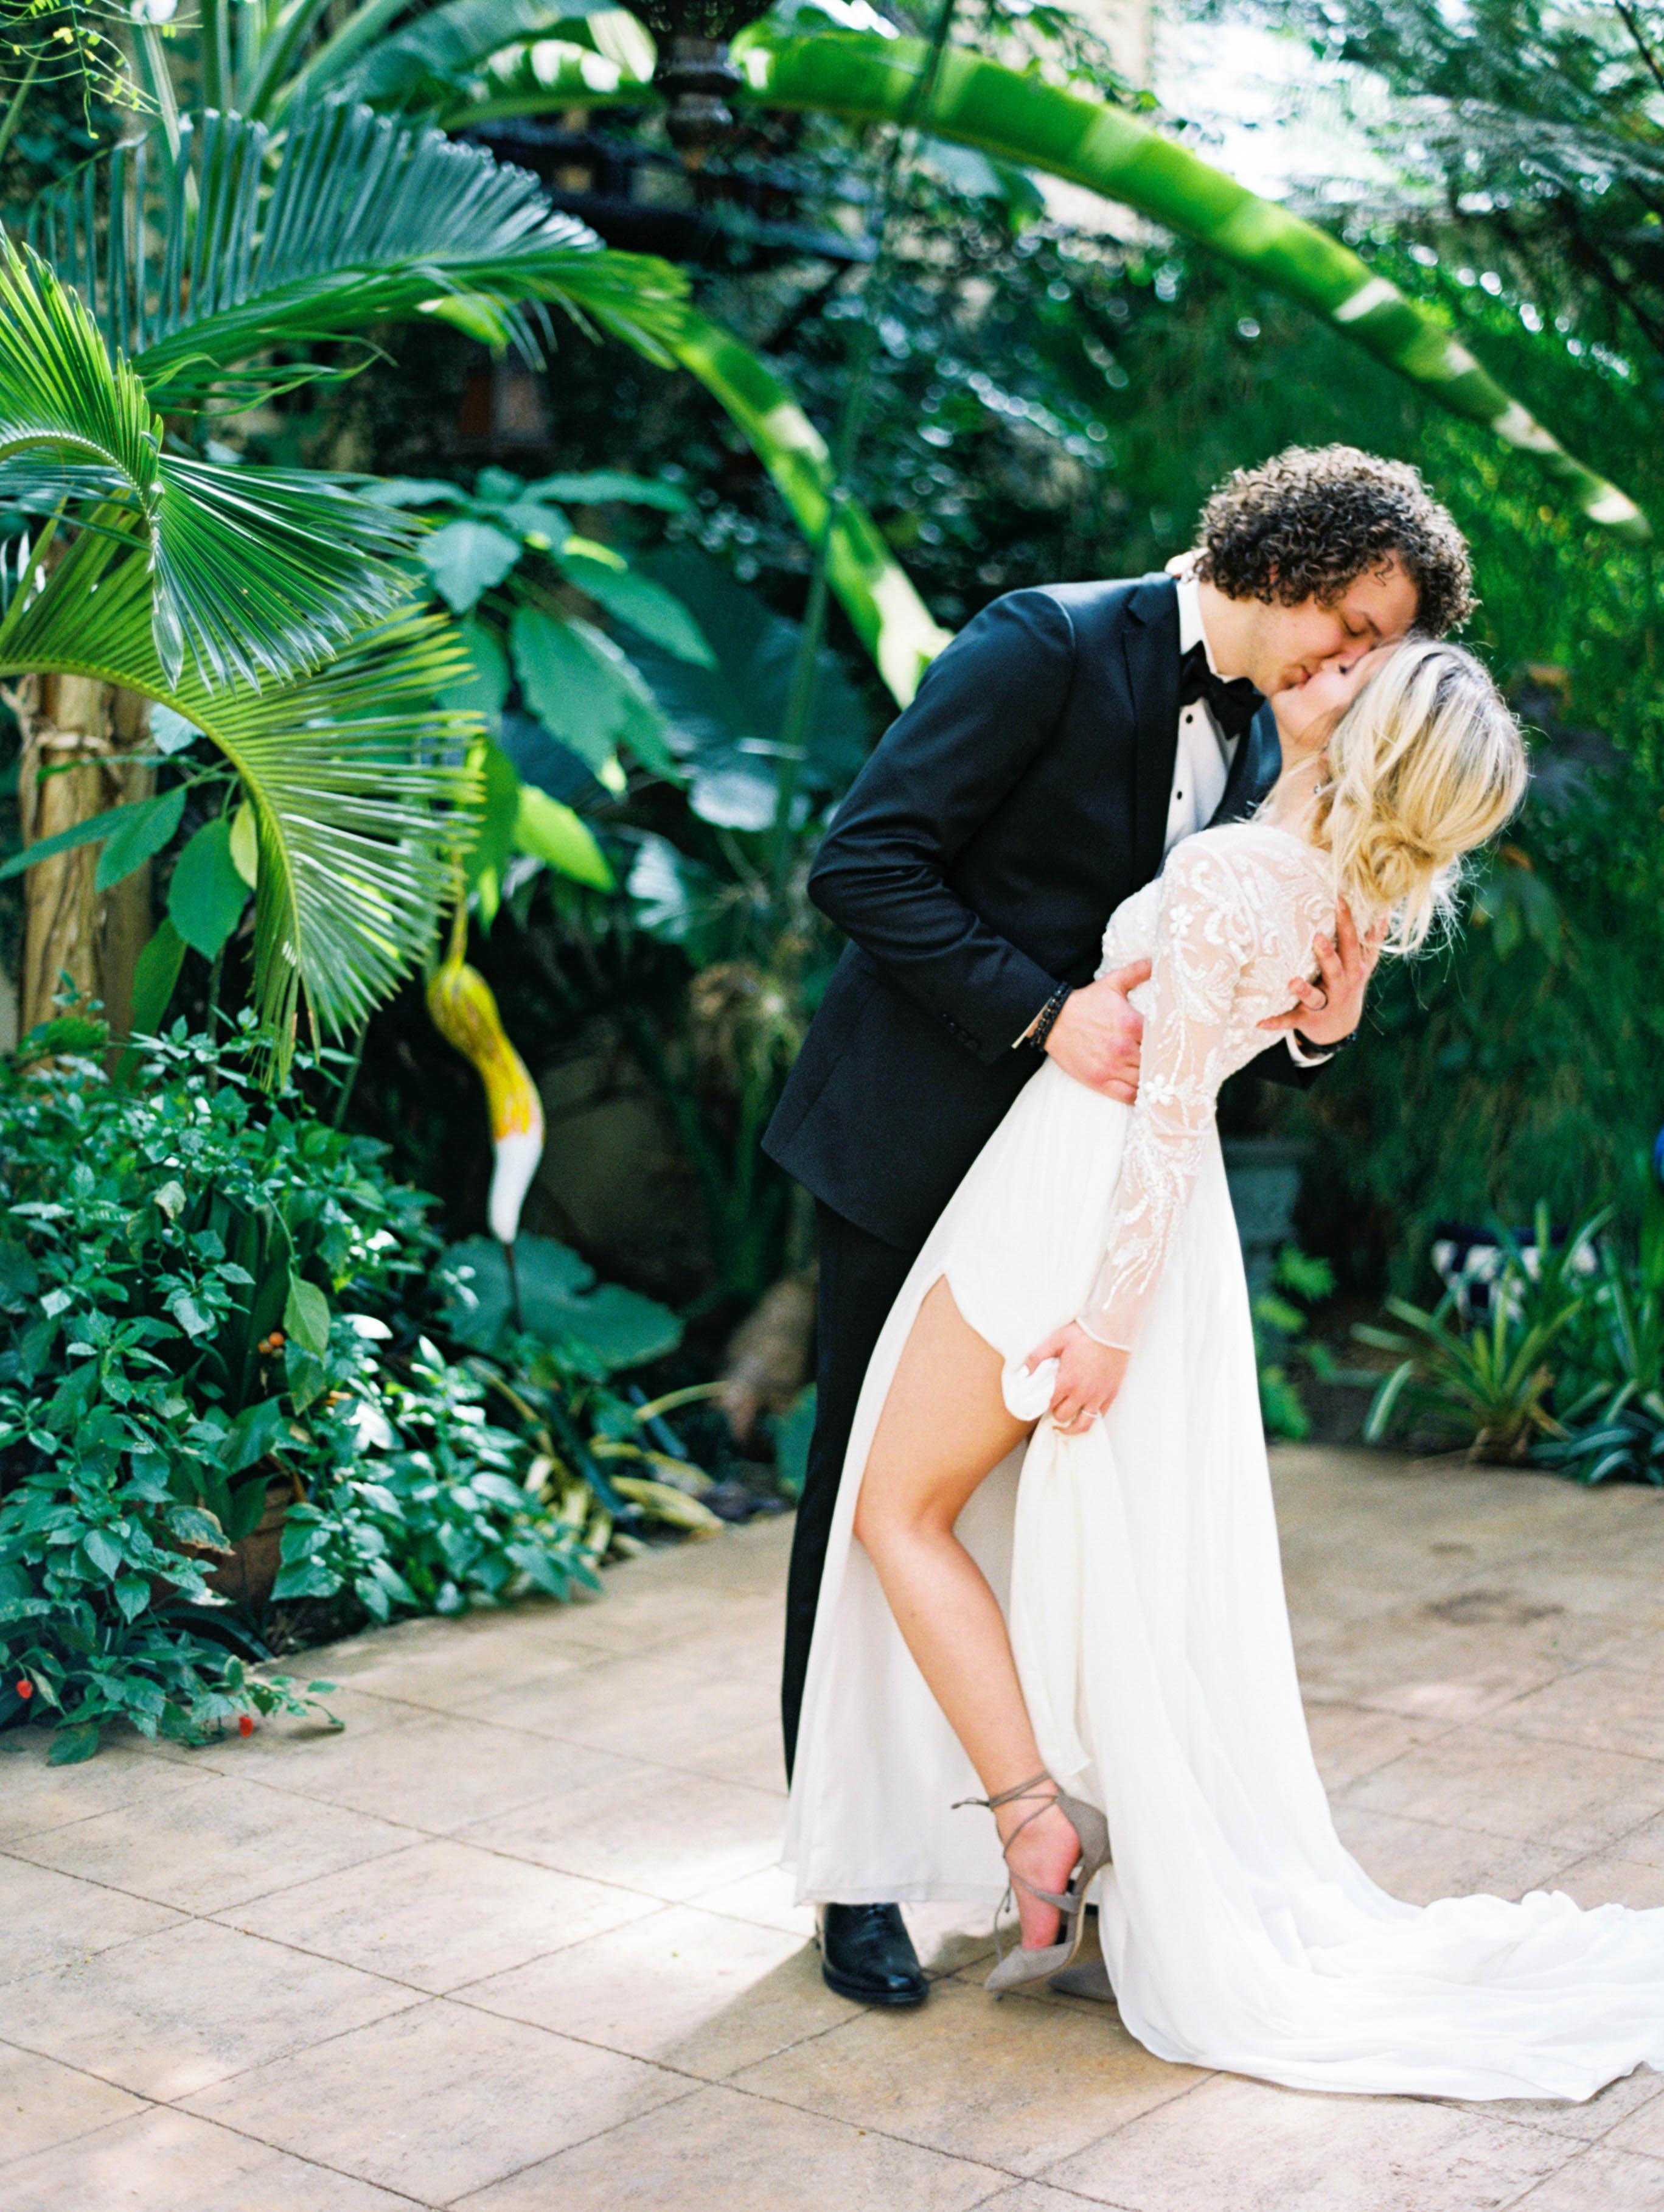 This Black Tie Wedding Is Filled with Every Trend You'll See This ...